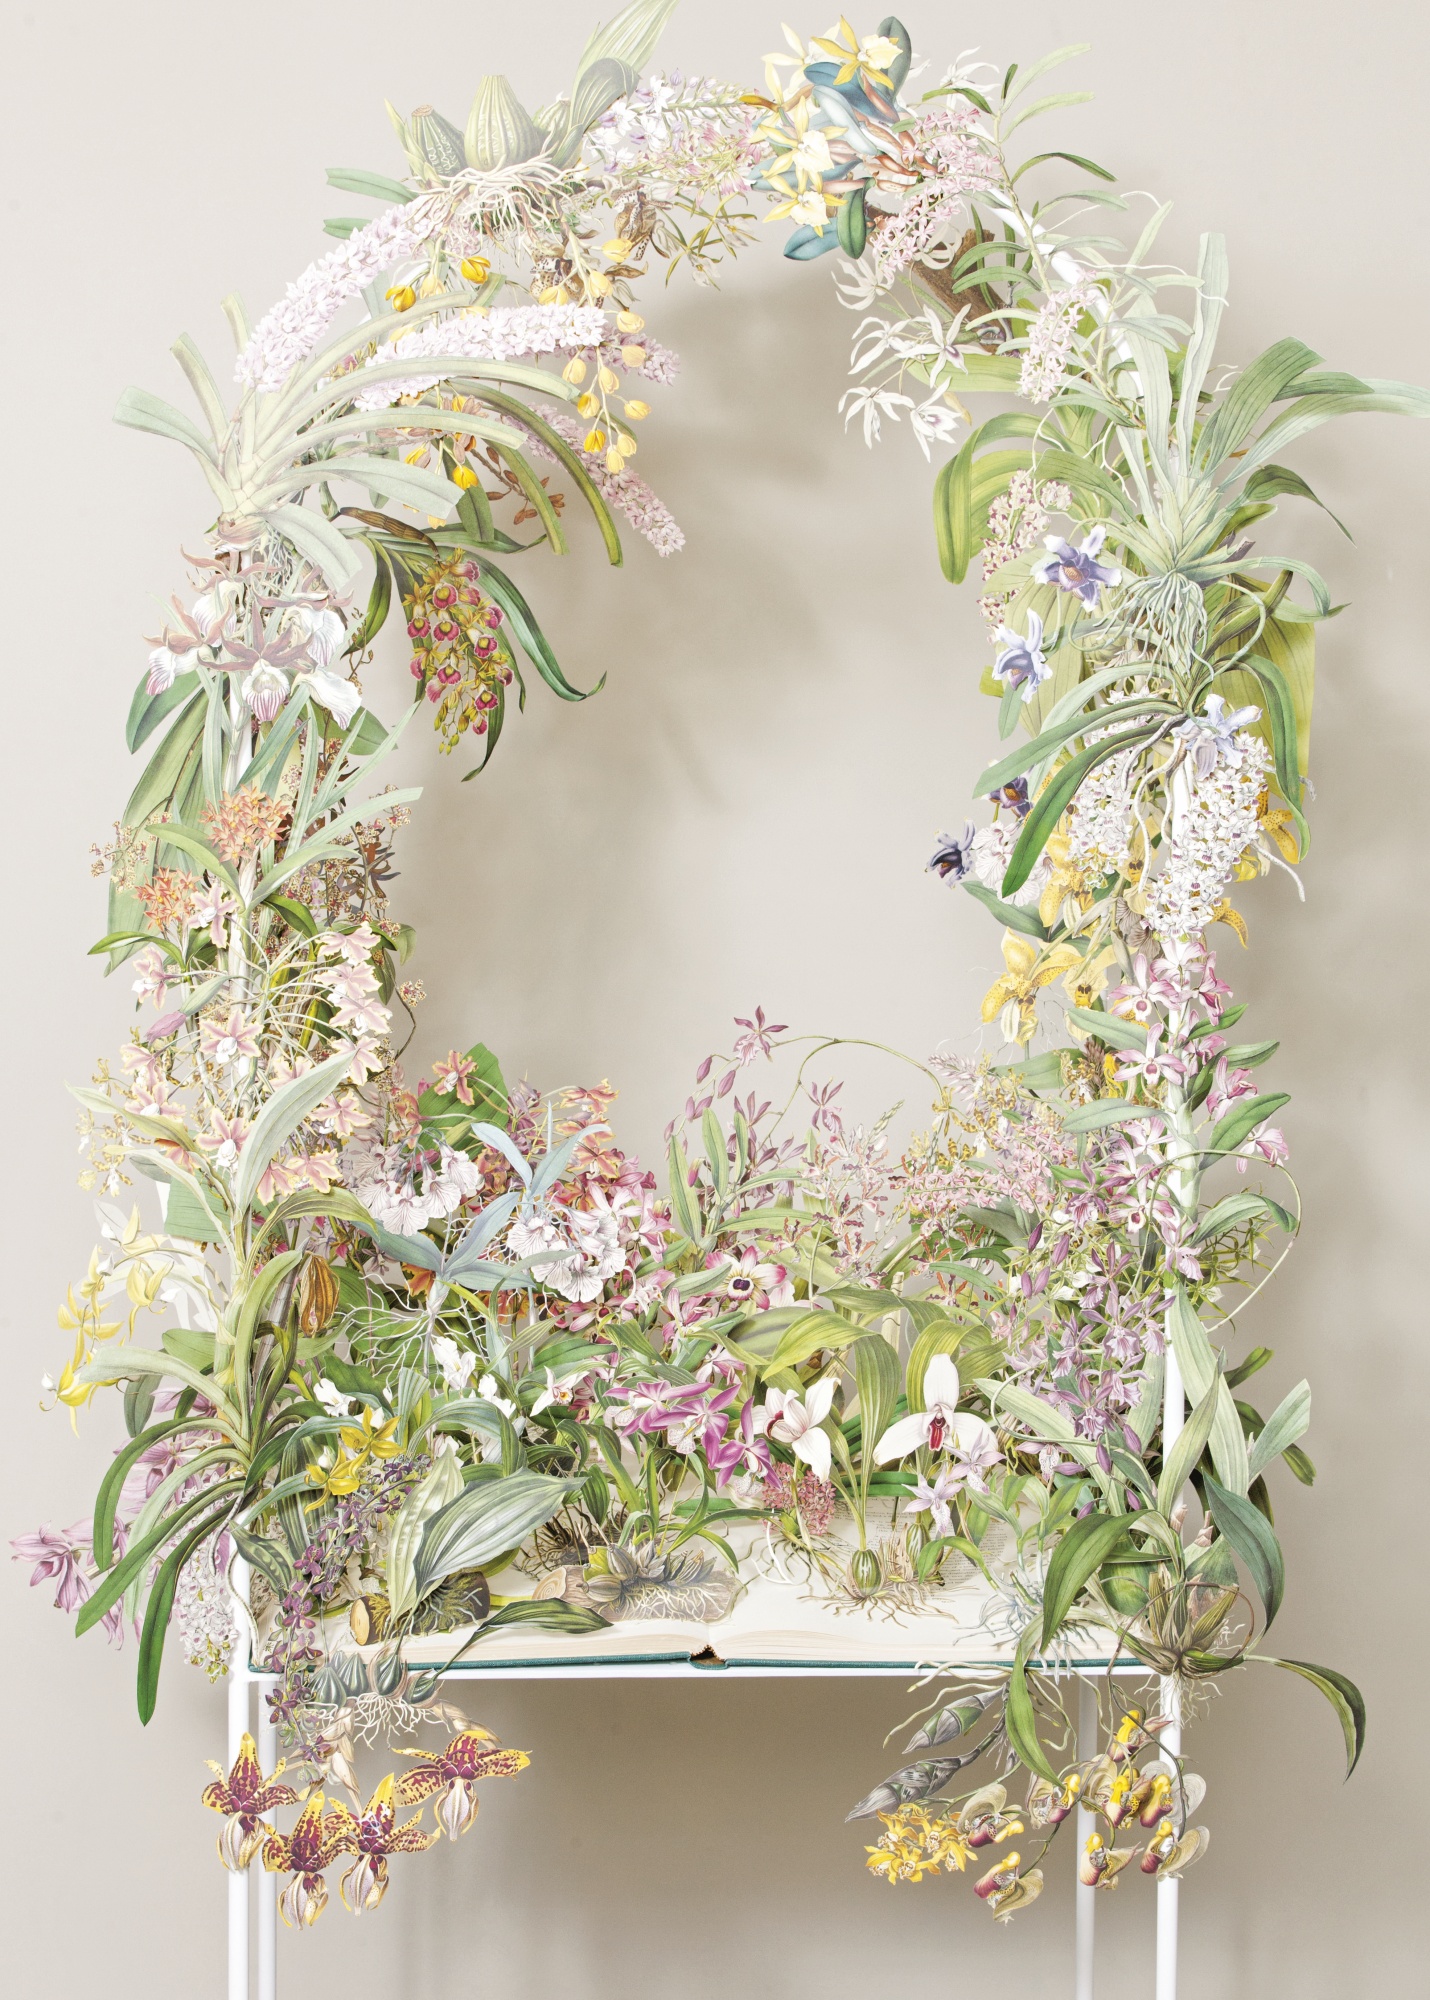 Su Blackwell, SERTUM ORCHIDACEUM (A WREATH OF THE MOST BEAUTIFUL ORCHIDACEIOUS FLOWERS), 2013 steel frame, with book and paper cut-outs 250 by 100 by 50cm.; 98 3/8  by 39 3/8  by 19 3/4in. Lot 3 Sotheby's Modern Makers.